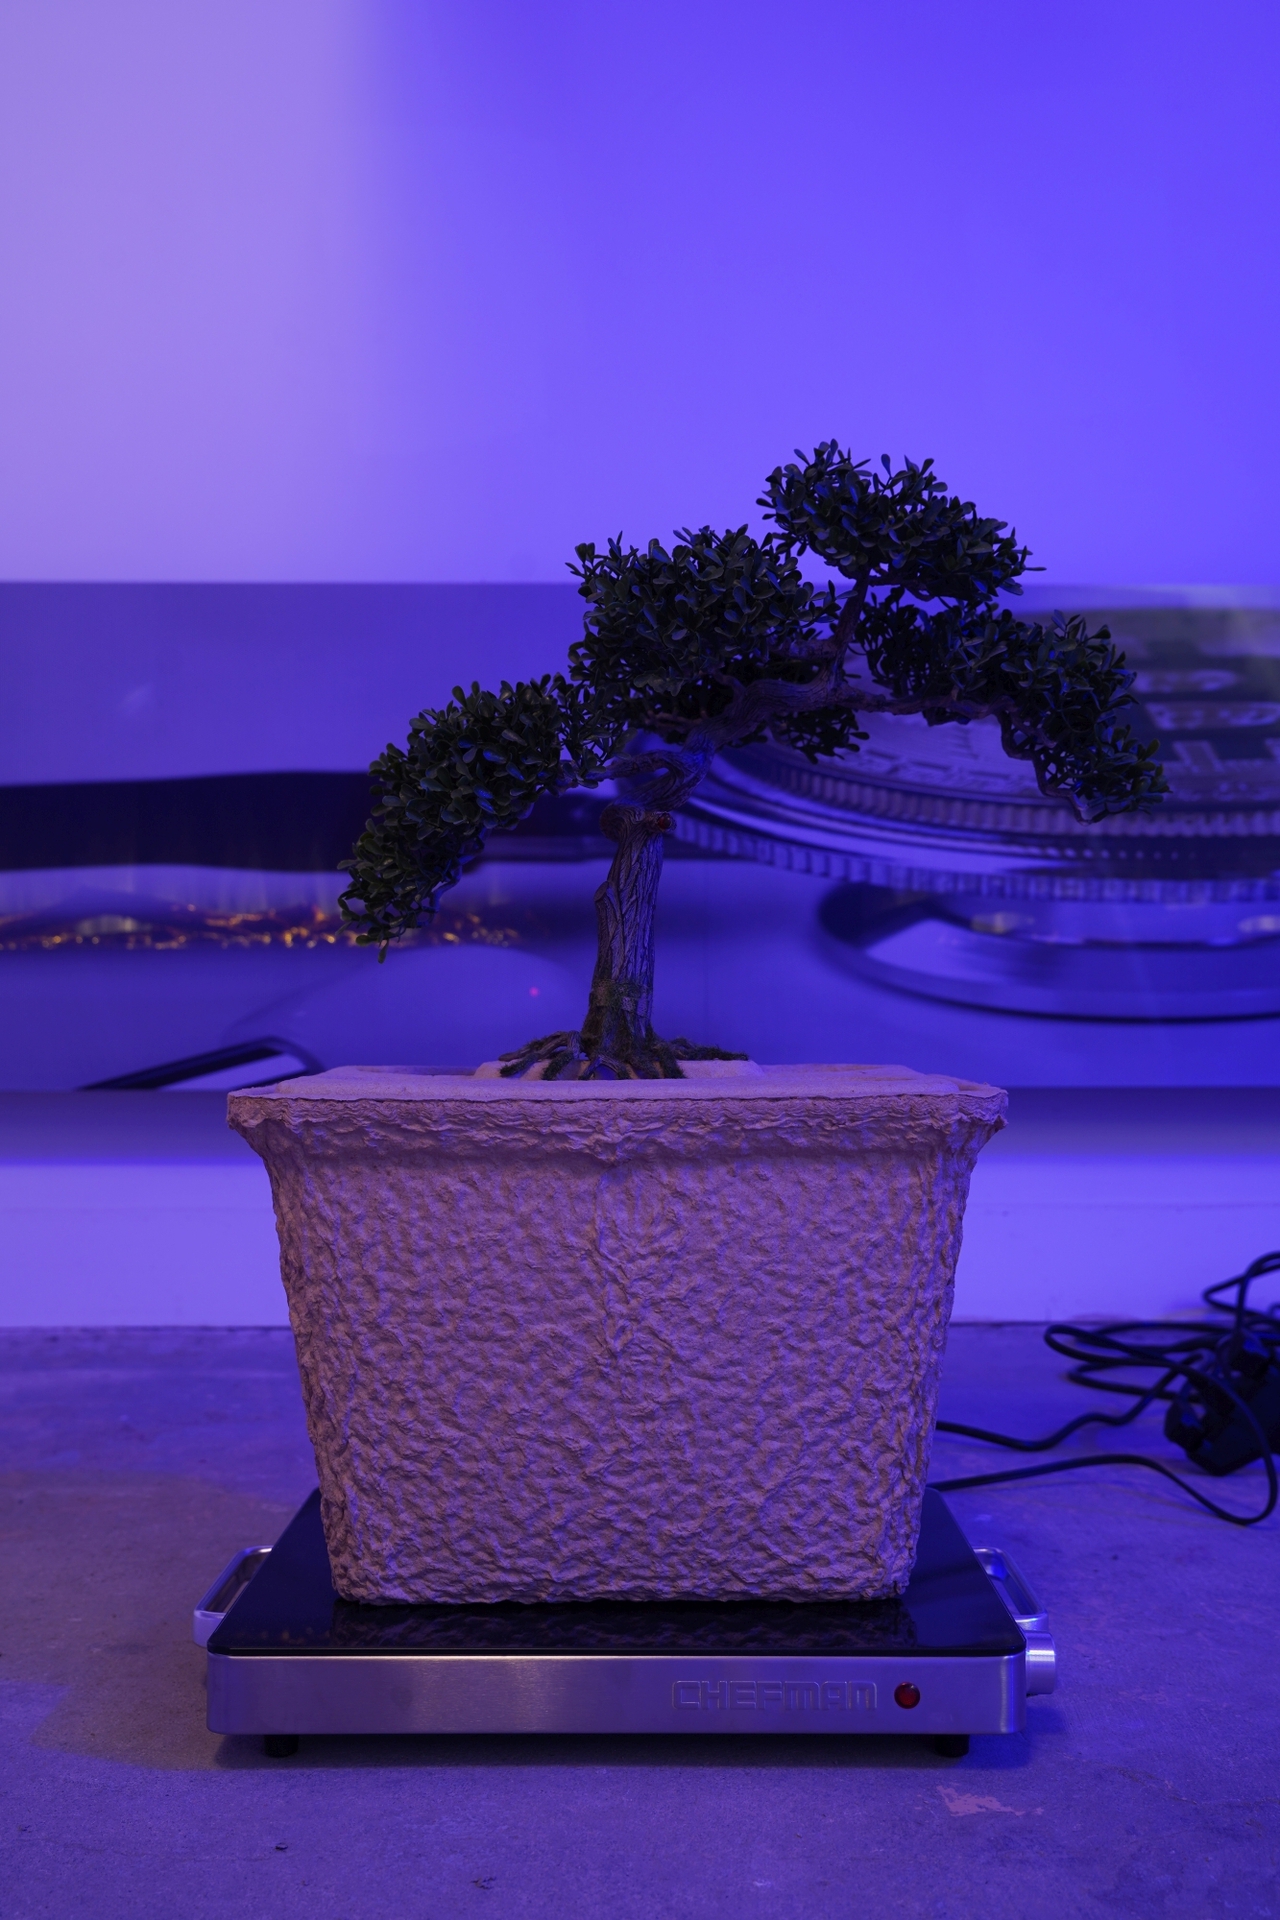 Graham Wiebe, Study for a Greener Burial, 2022, hot plate, compostable cooler, plastic bonsai tree, extension cord, 25x20x14 in